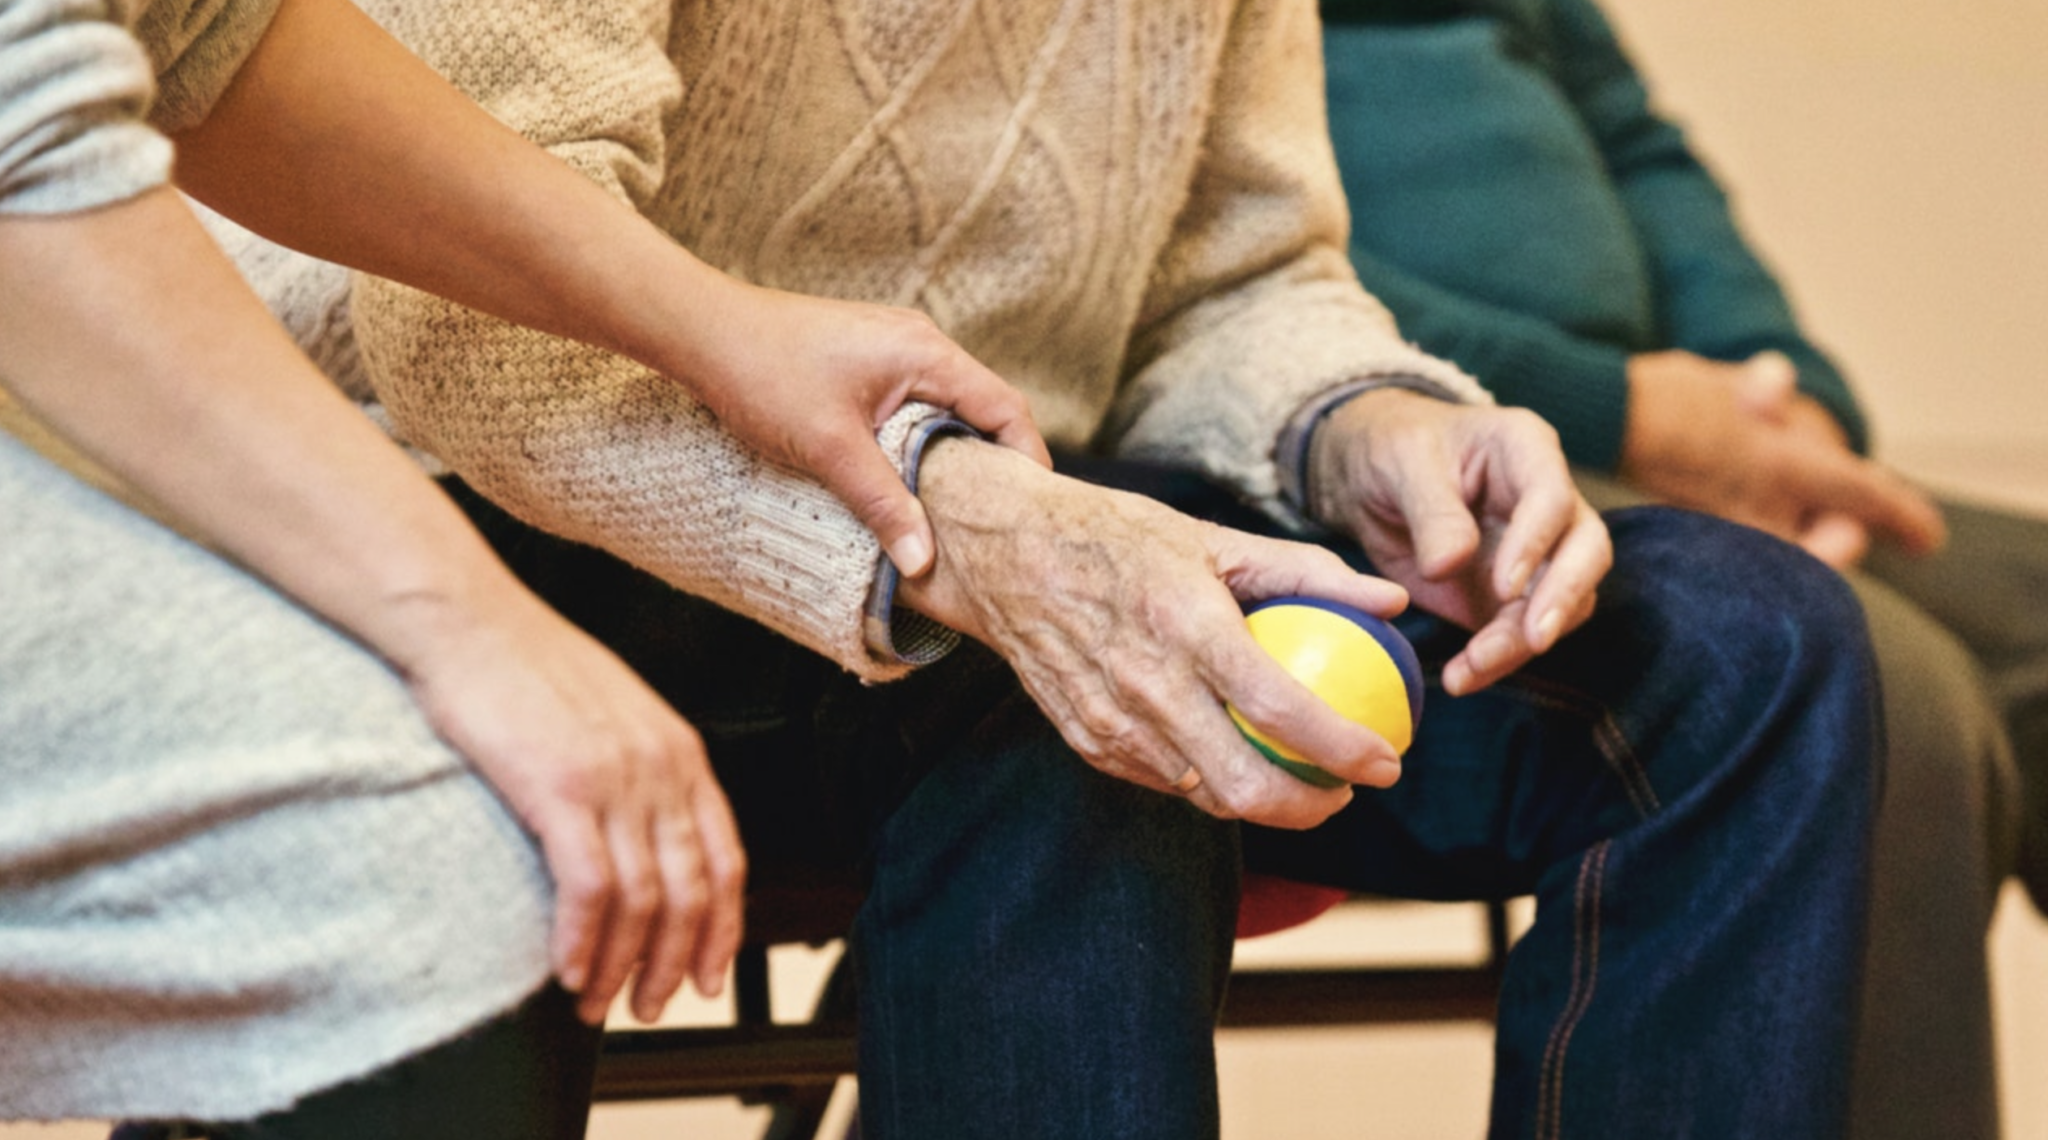 a carer carefully holding an older person's hand